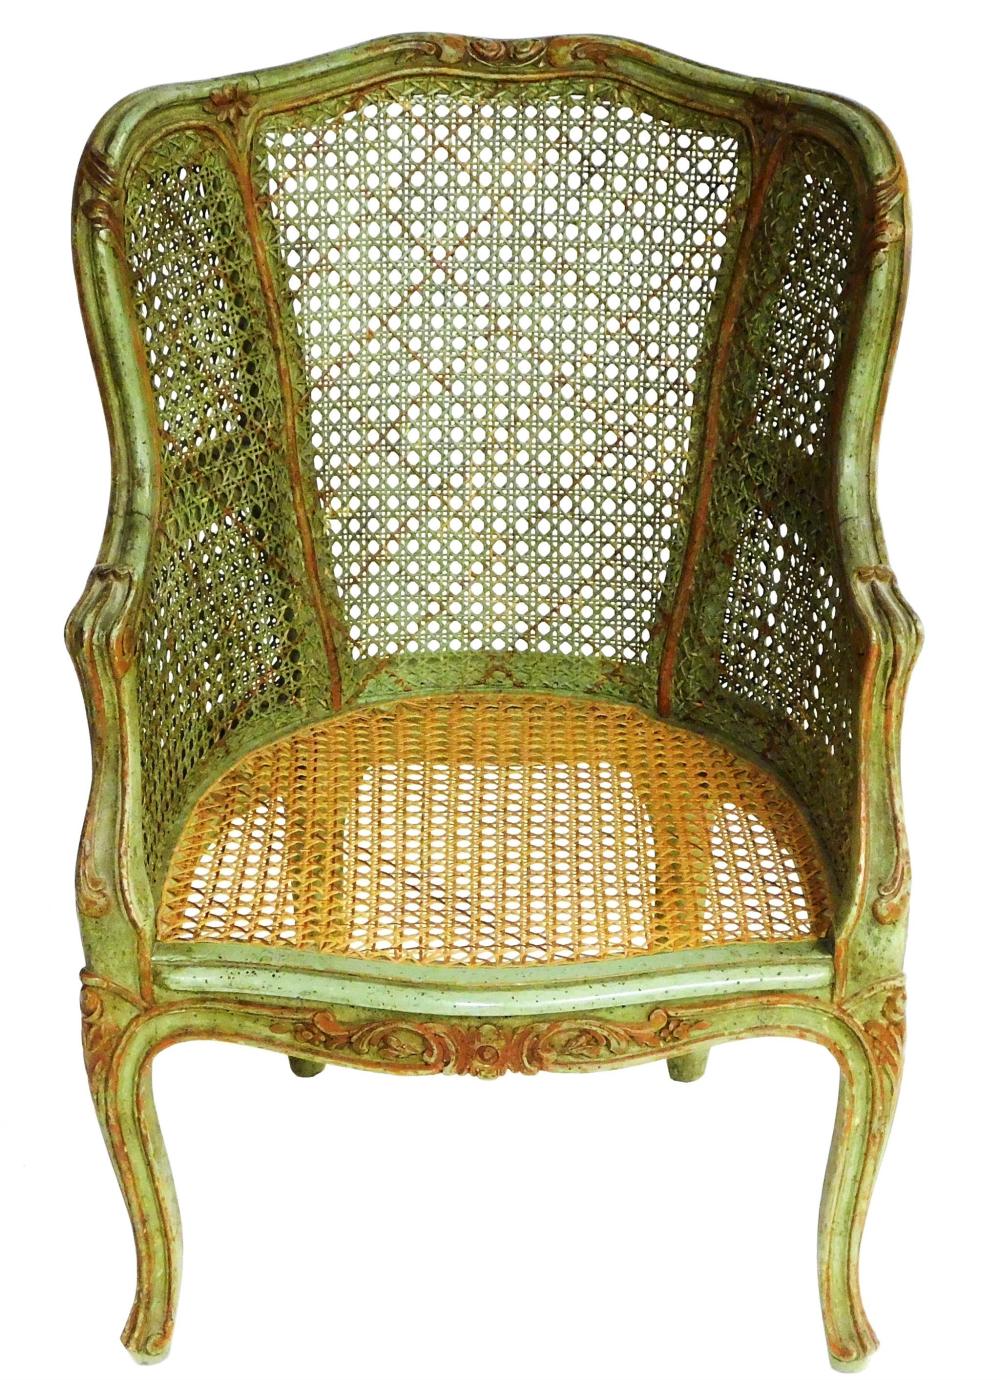 CHILDS FRENCH STYLE CHAIR, PAINTED